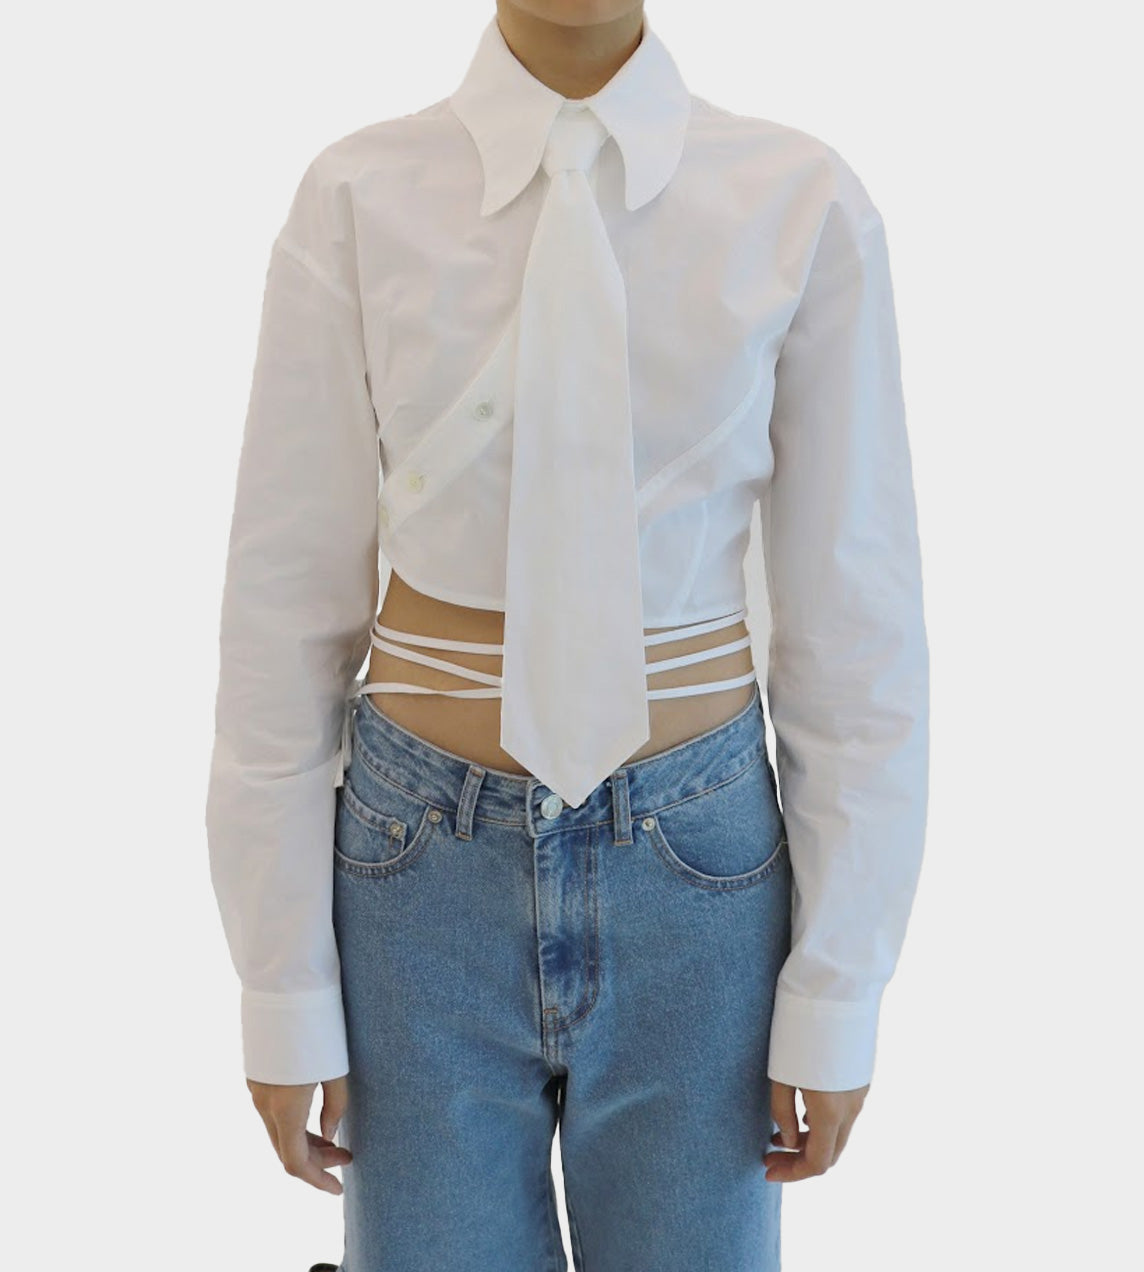 Tie Twisted Shirt White